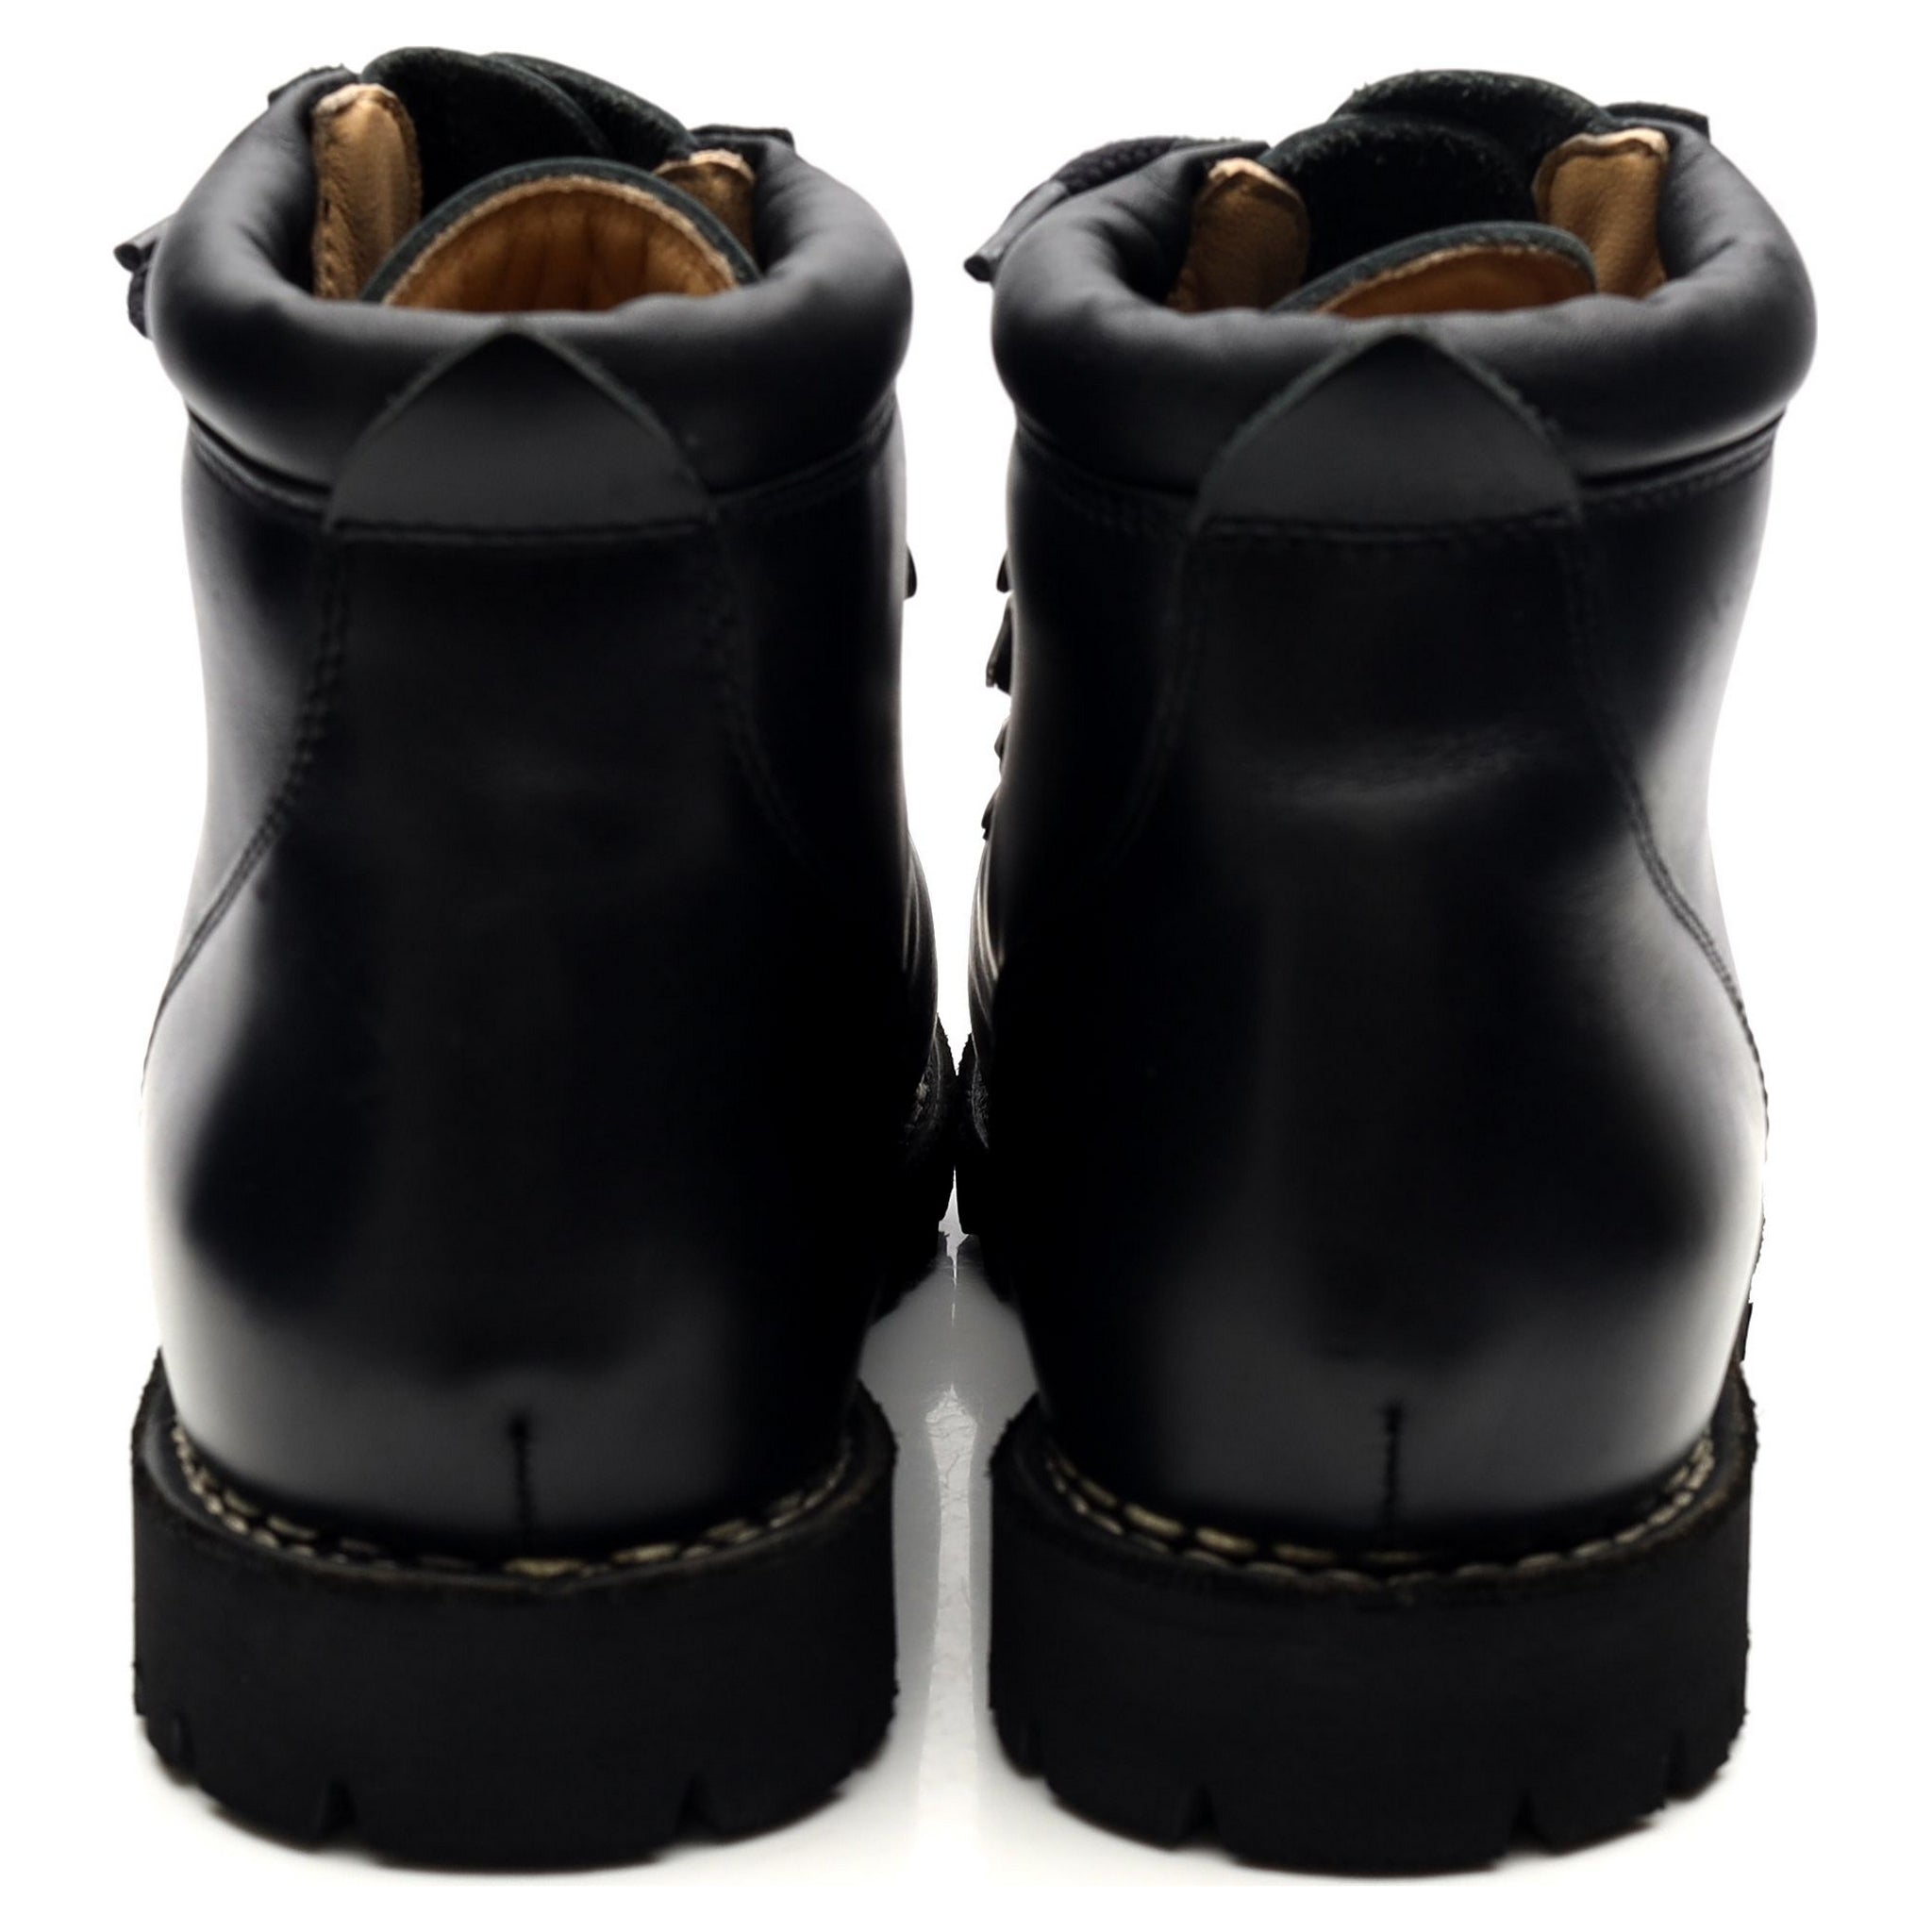 Avoriaz' Black Leather Hiker Boots UK 10 - Abbot's Shoes